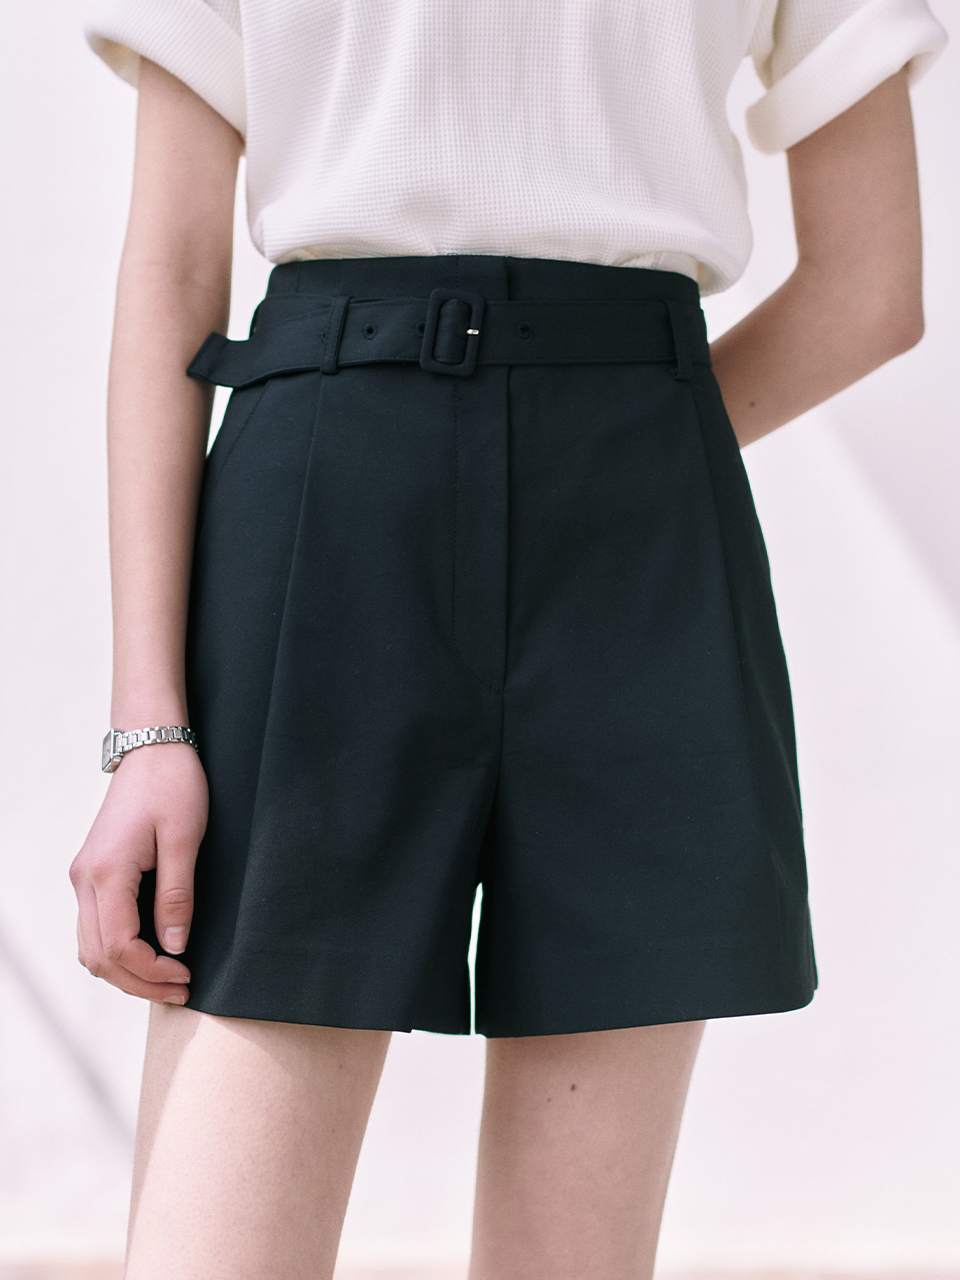 Belted Pintuck Short Pants_3color